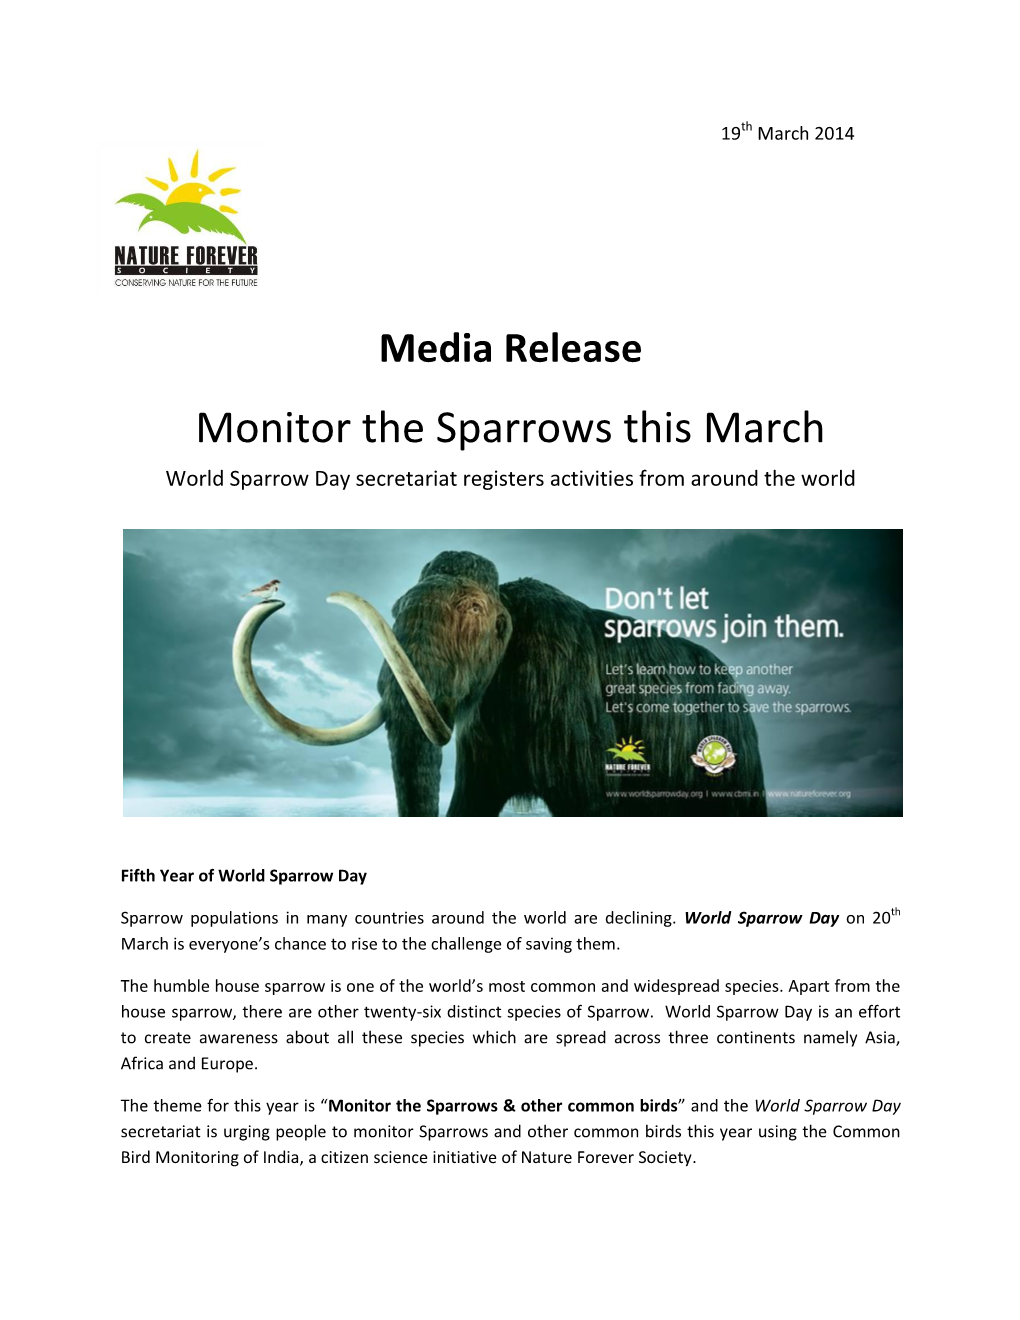 Monitor the Sparrows This March World Sparrow Day Secretariat Registers Activities from Around the World